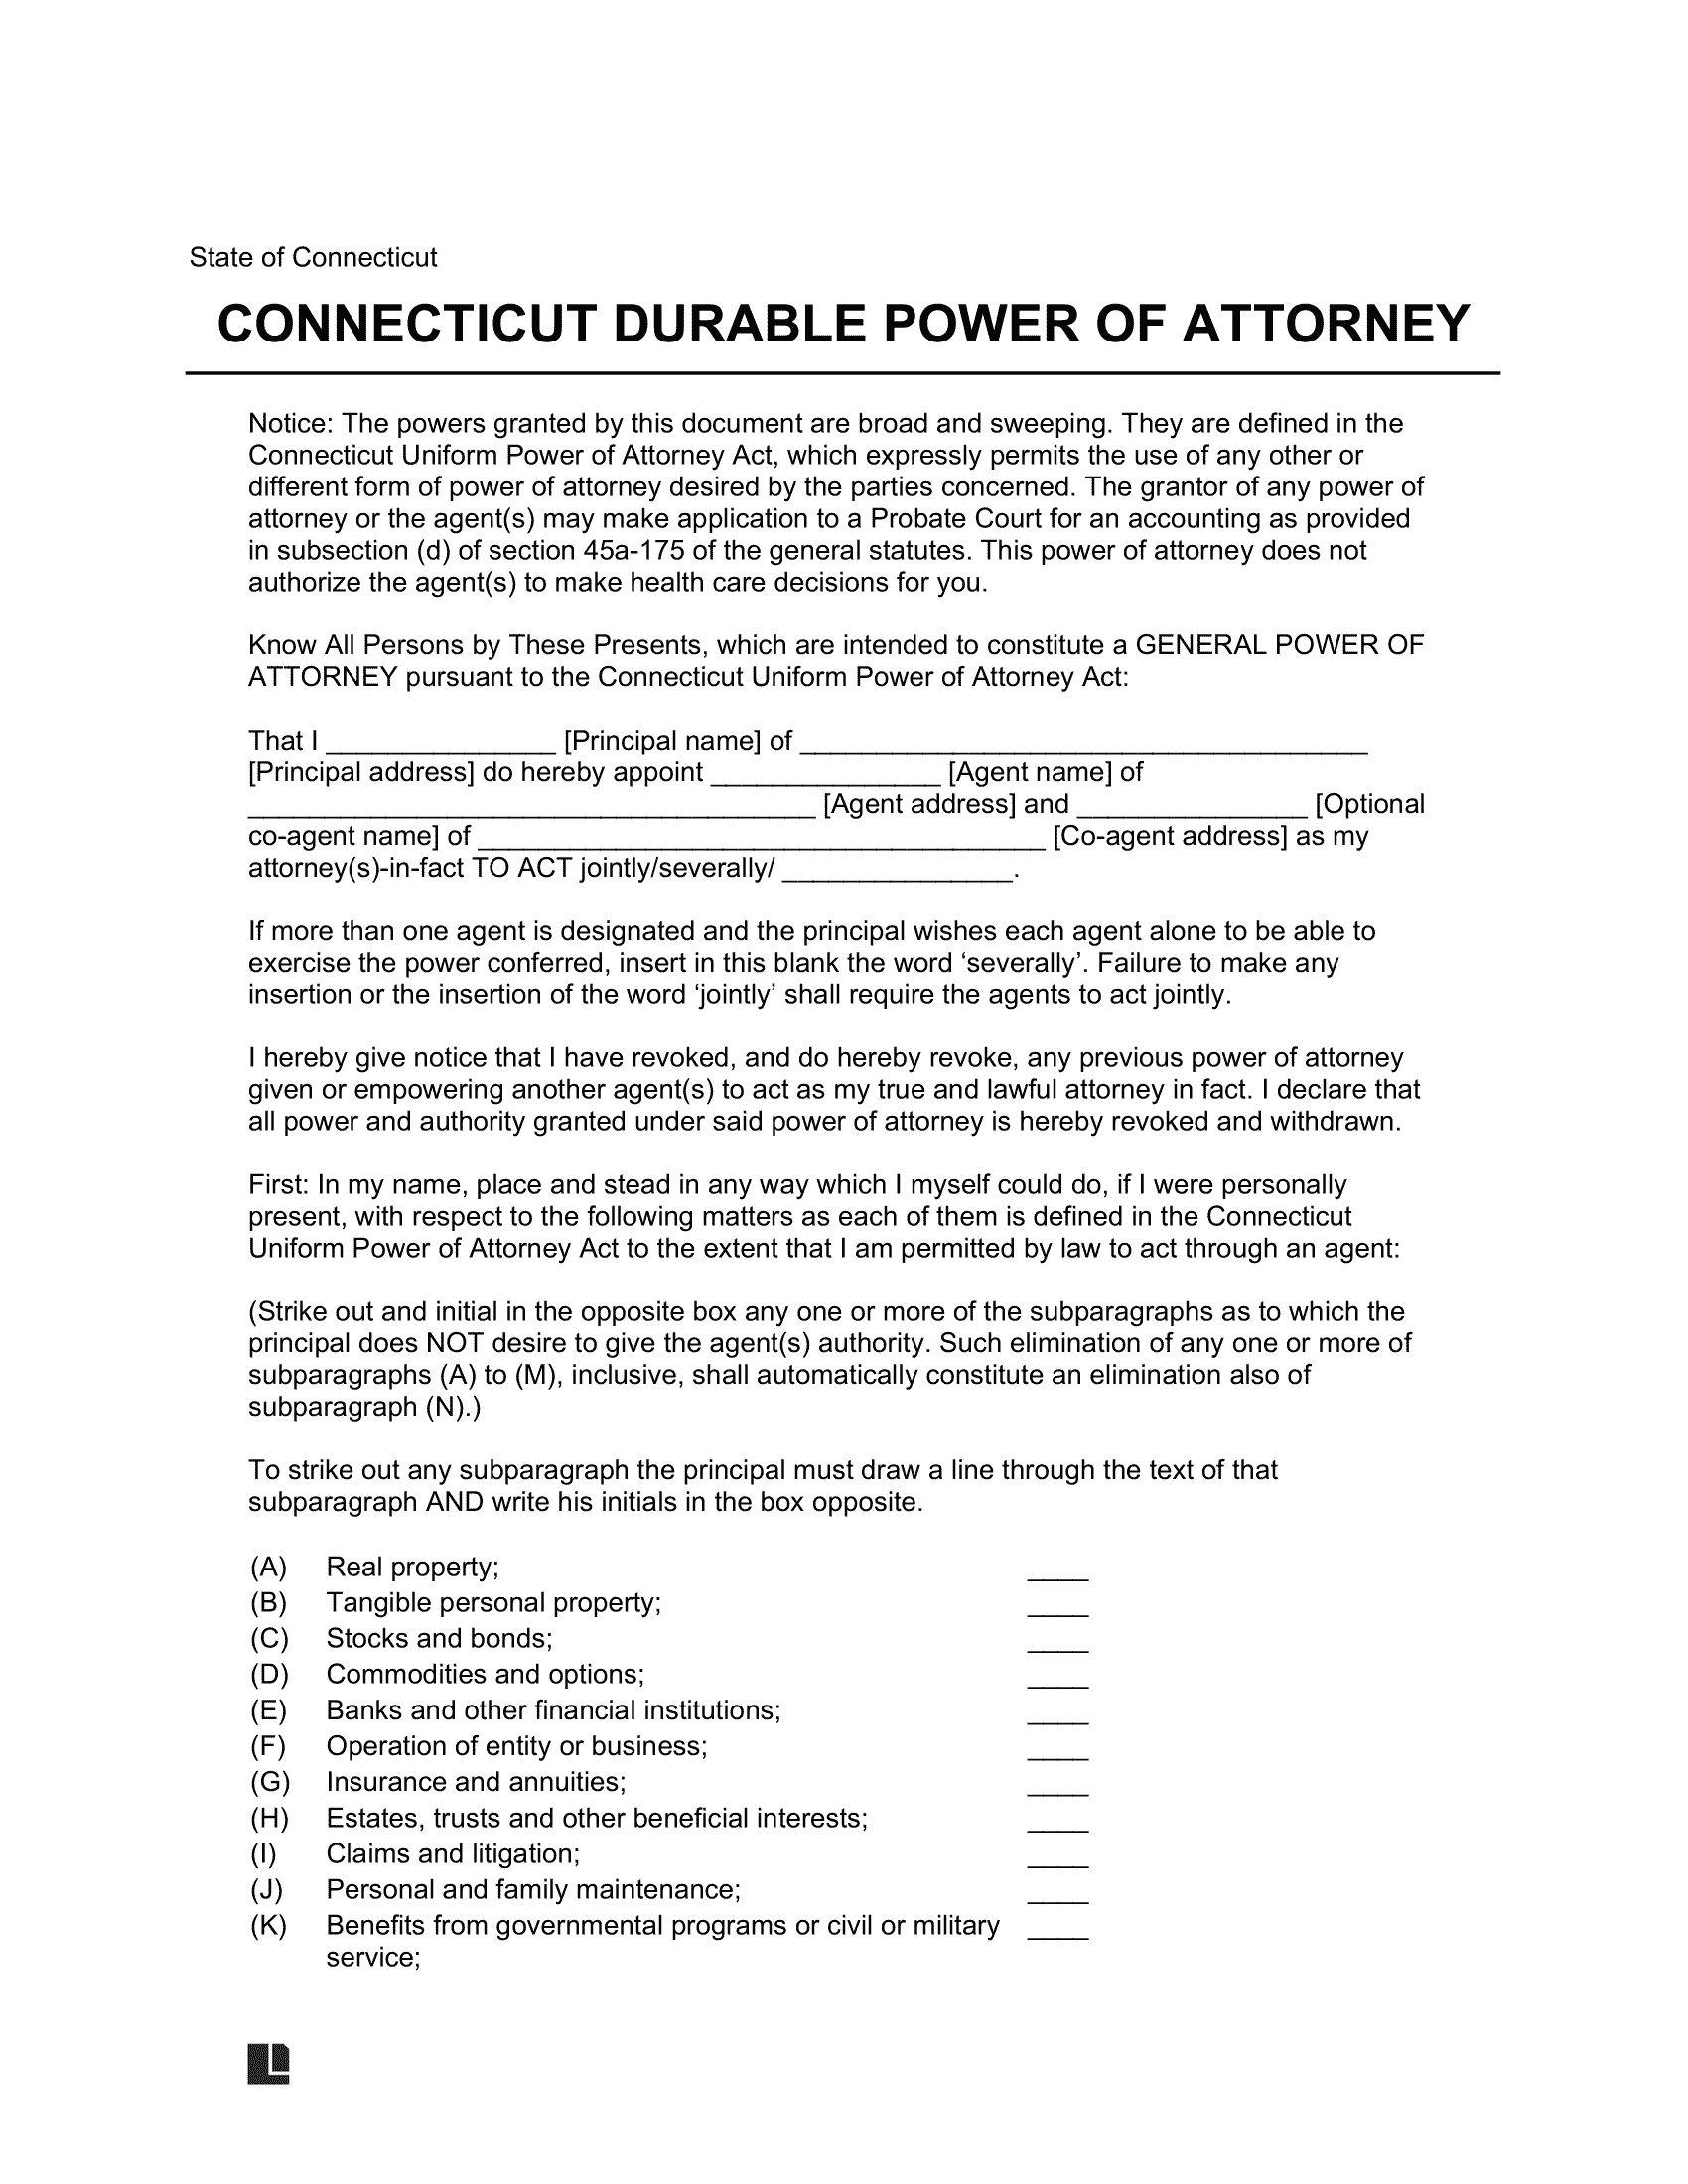 Connecticut Durable Statutory Power of Attorney Form